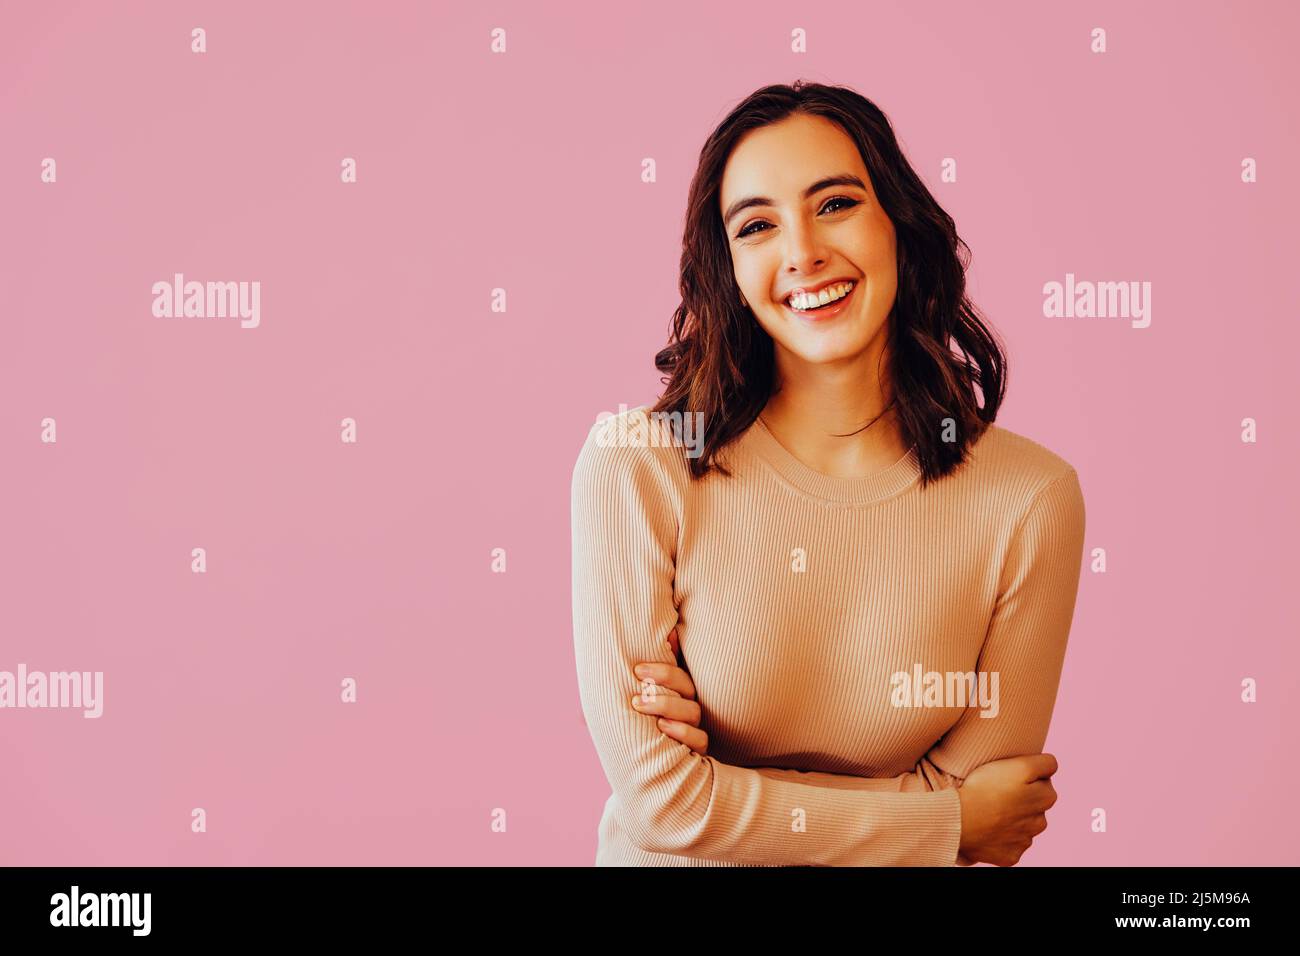 Young brunette woman smiling girl posing isolated on pink background studio portrait. People sincere emotions lifestyle concept. Holding hands crossed. positive Stock Photo